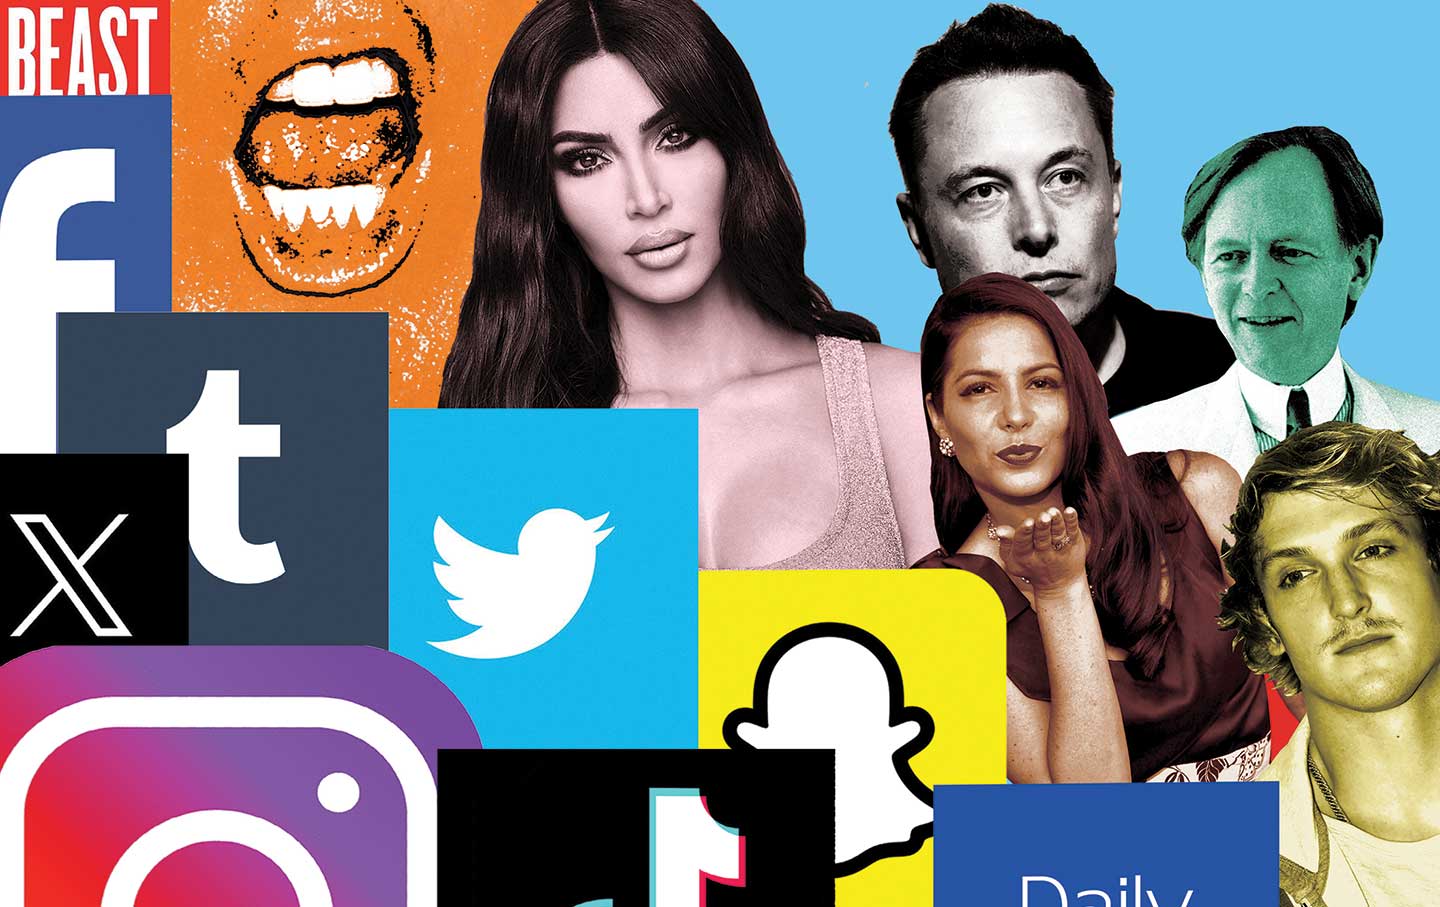 Influence and the Rise of Digital Celebrity